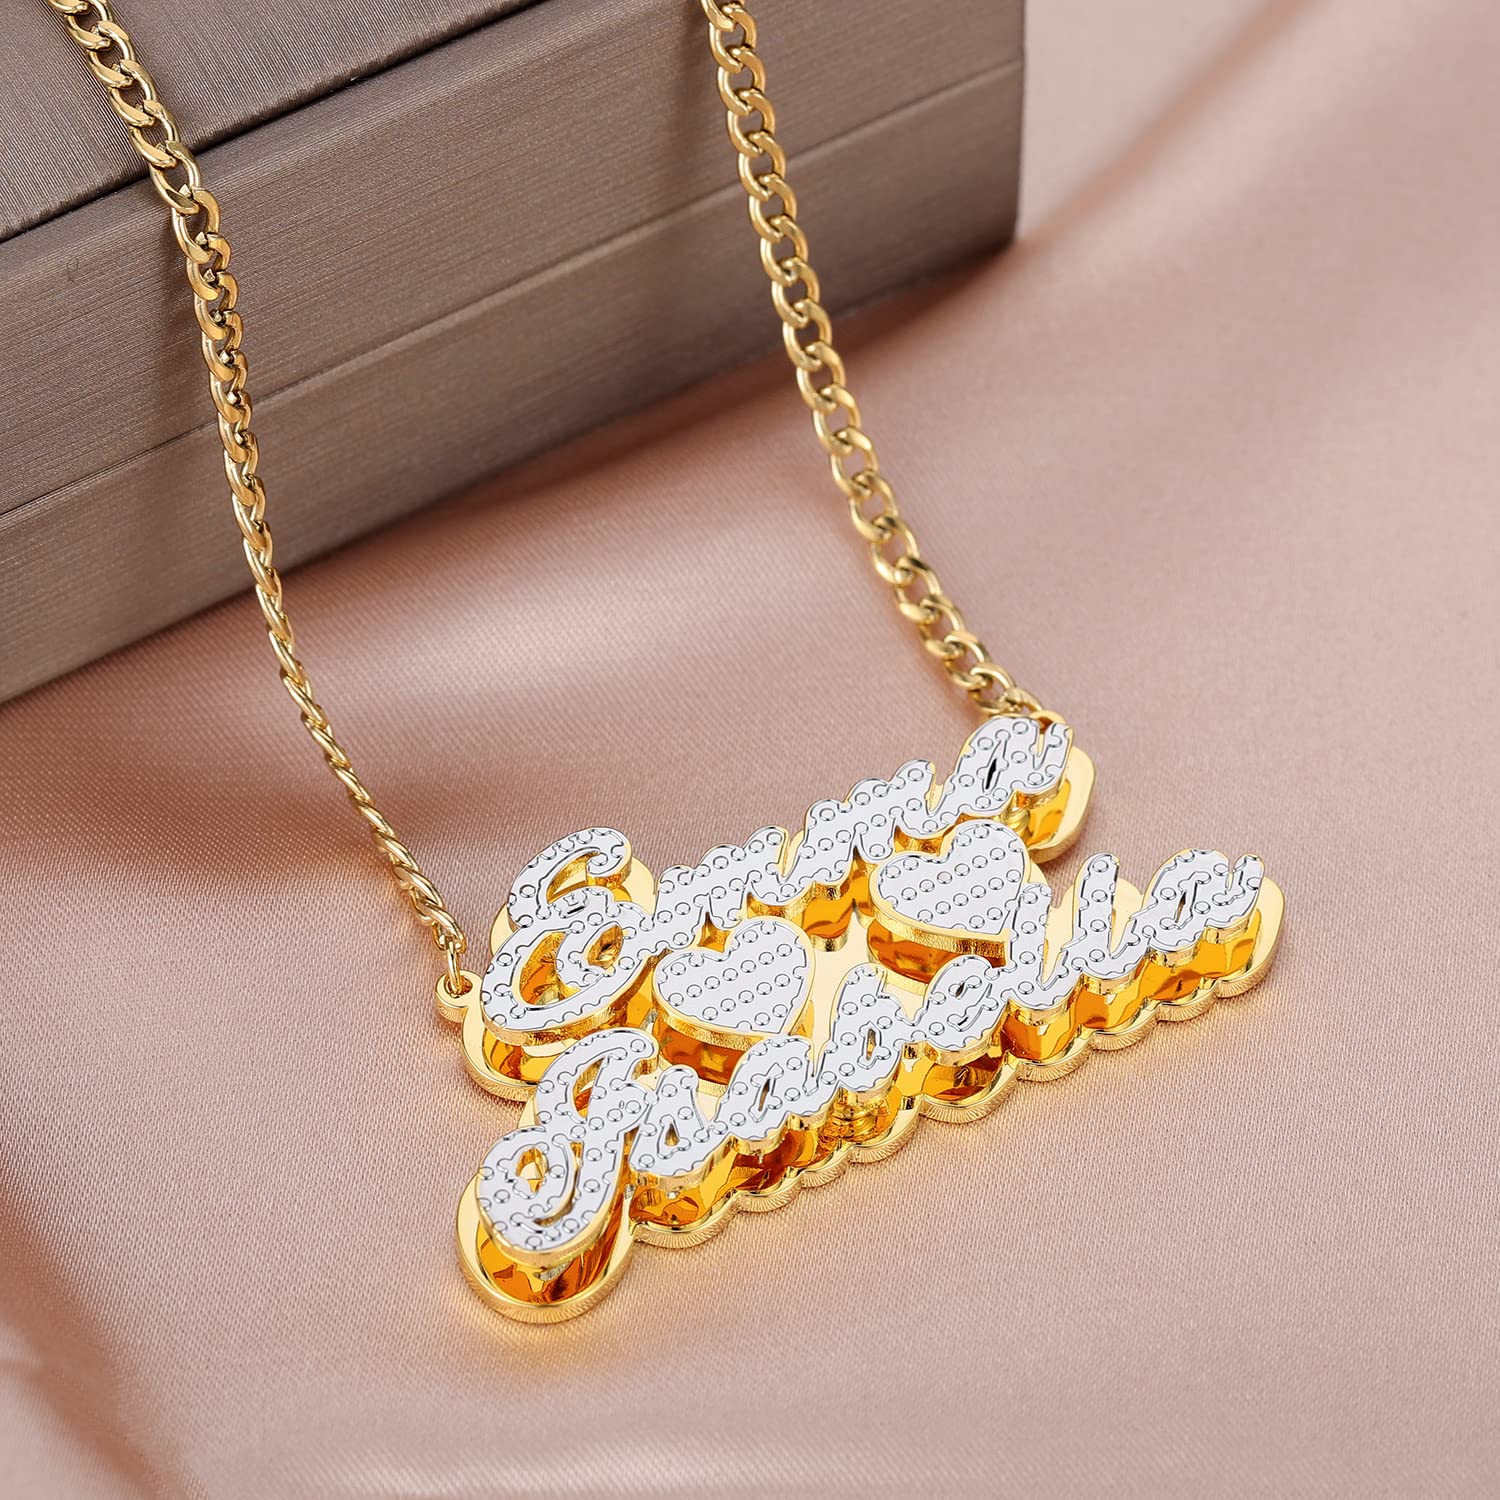 Qitian Gifts for Boyfriend/Girlfriend Double Plated Name Necklace Personalized Custom Nameplate Pendant Couple Necklace Personalized Name Jewelry for Women Men Girls Birthday Gifts